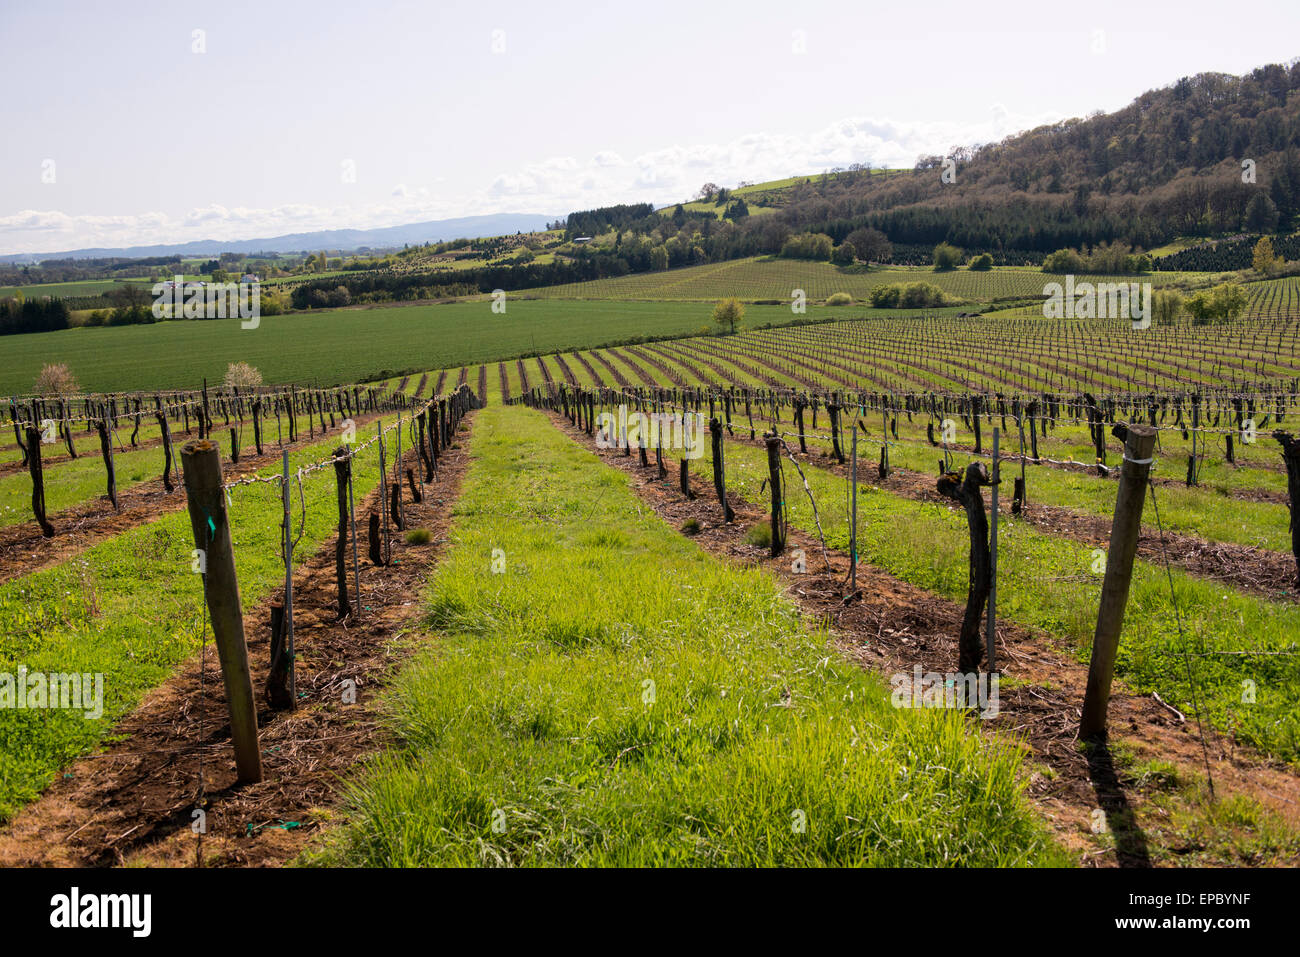 Rolling fields of vines, farmland, and forest near Yamhill Valley Vineyards in McMinnville, Oregon, United States. Stock Photo